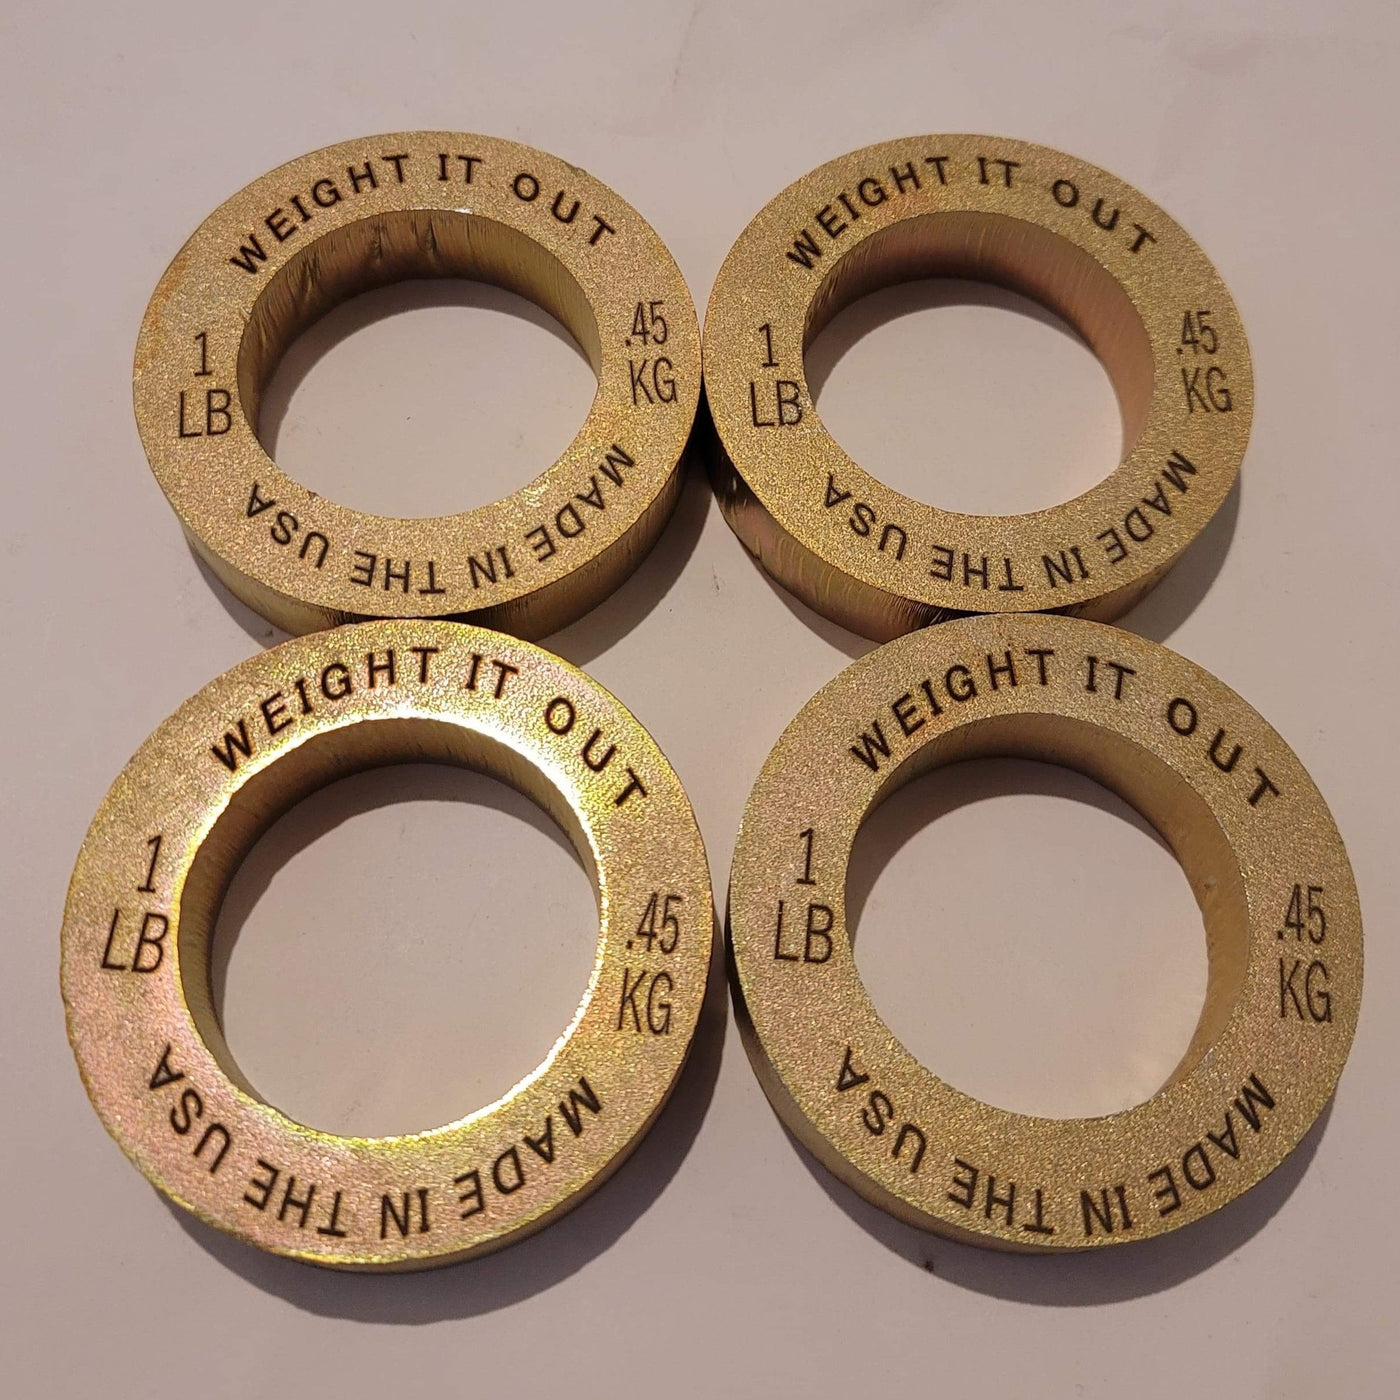 1 Pound Weight Plate Pair "NUTS"